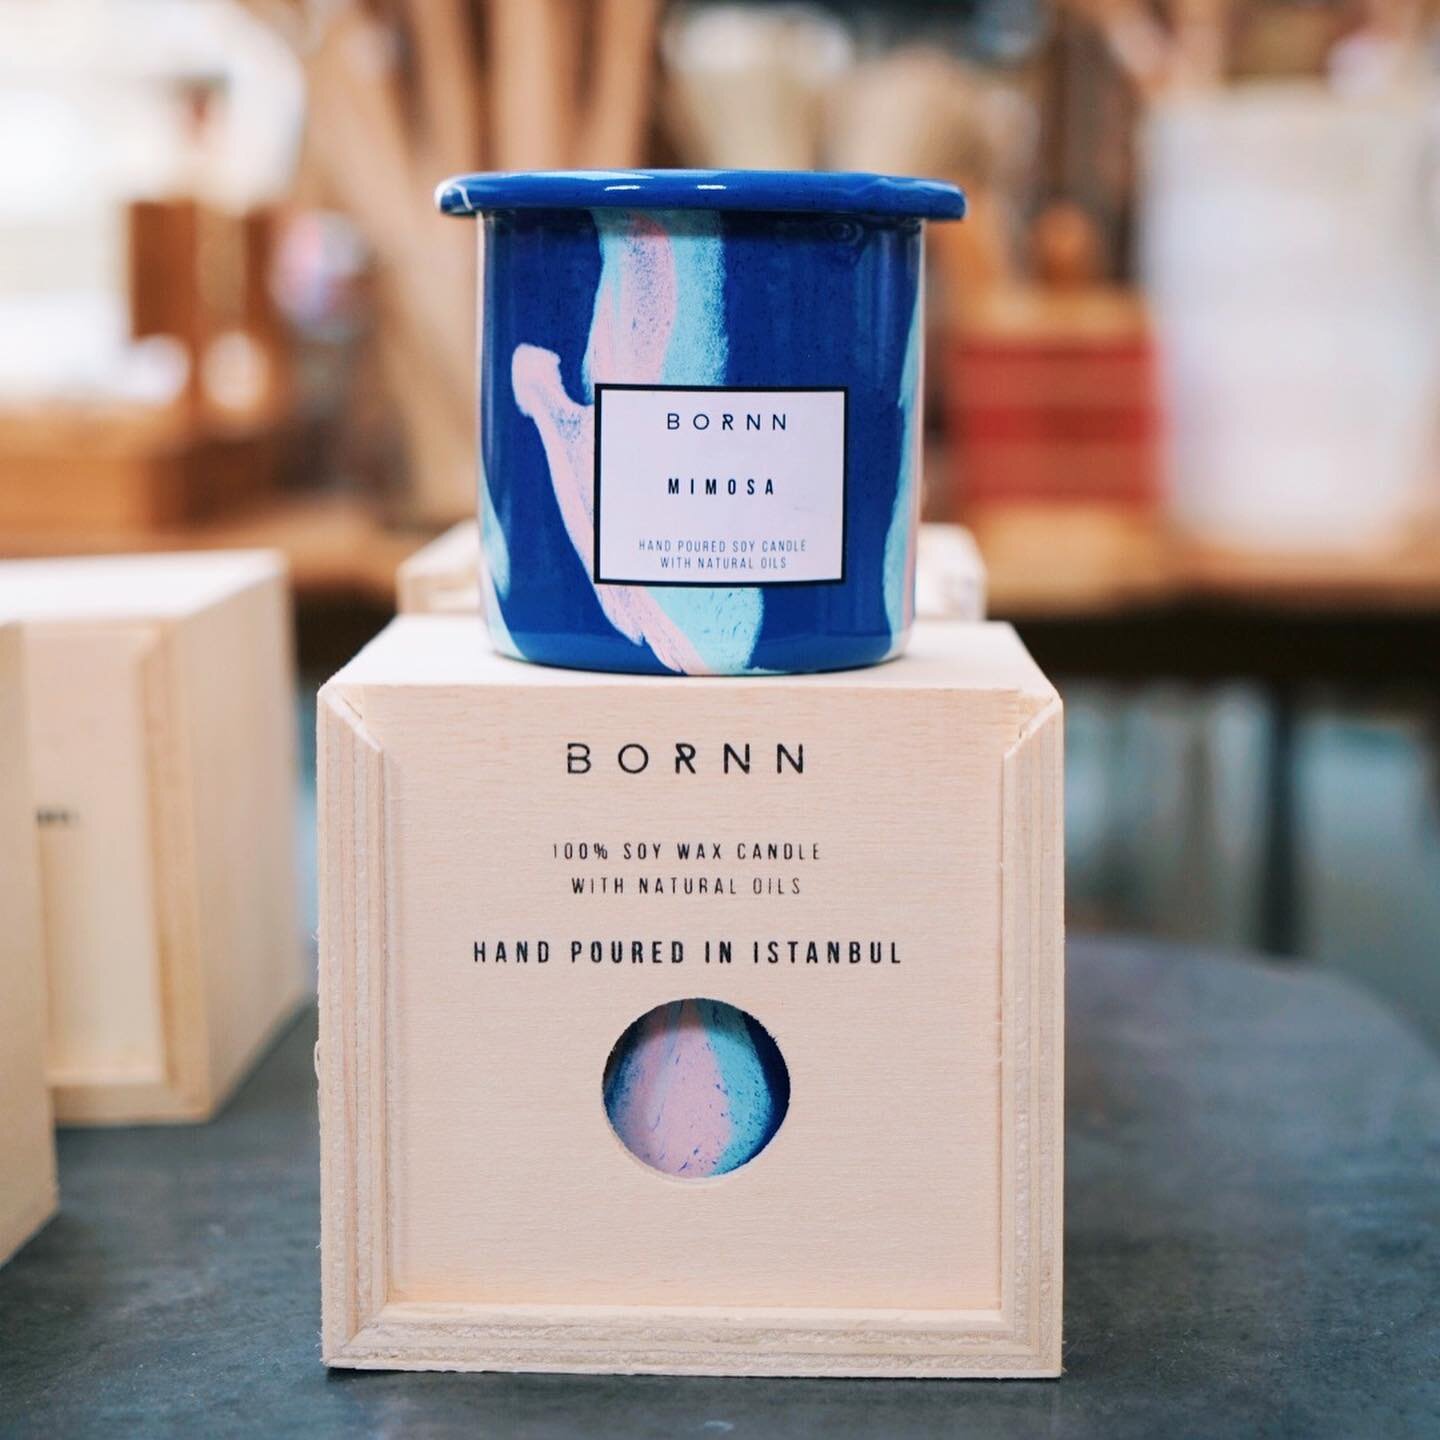 Our home store is now stocking a selection of beautiful candles (and enamelware!) from @bornnenamelware!

These 100% soy wax candles are all hand poured into enamel canisters with essential oils in Istanbul. They all come in these beautiful wooden bo